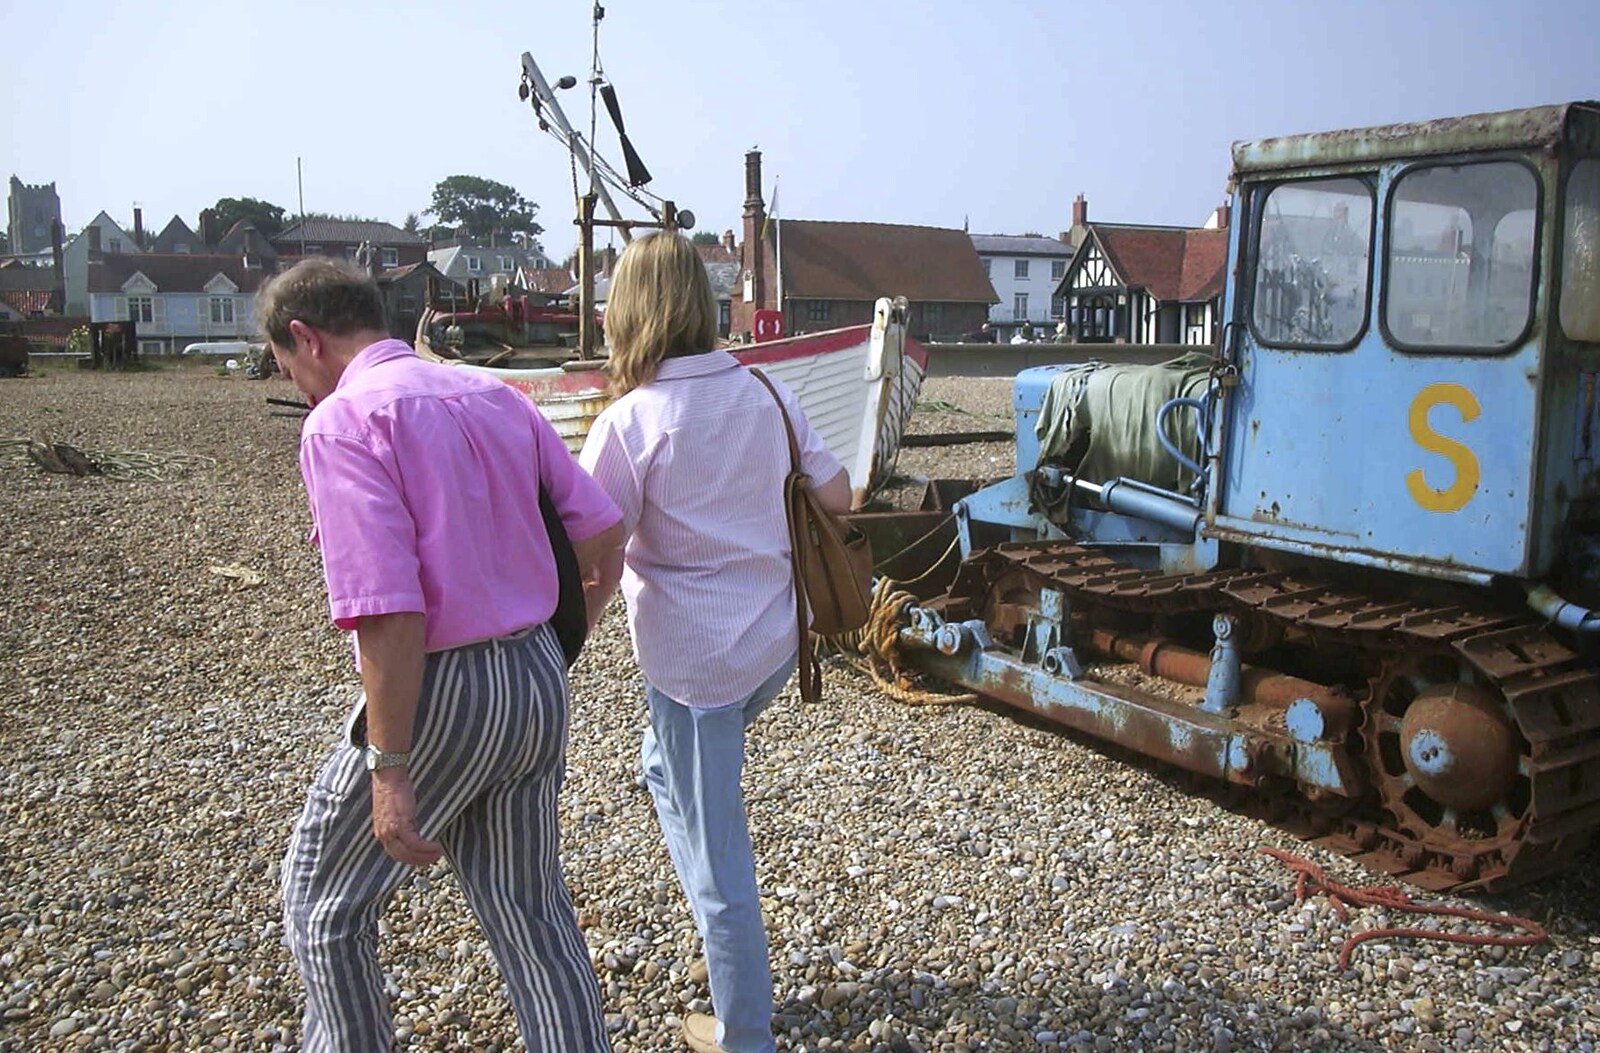 Walking by the derelict bulldozer from Mother and Mike Visit Aldeburgh, Suffolk - 8th August 2003